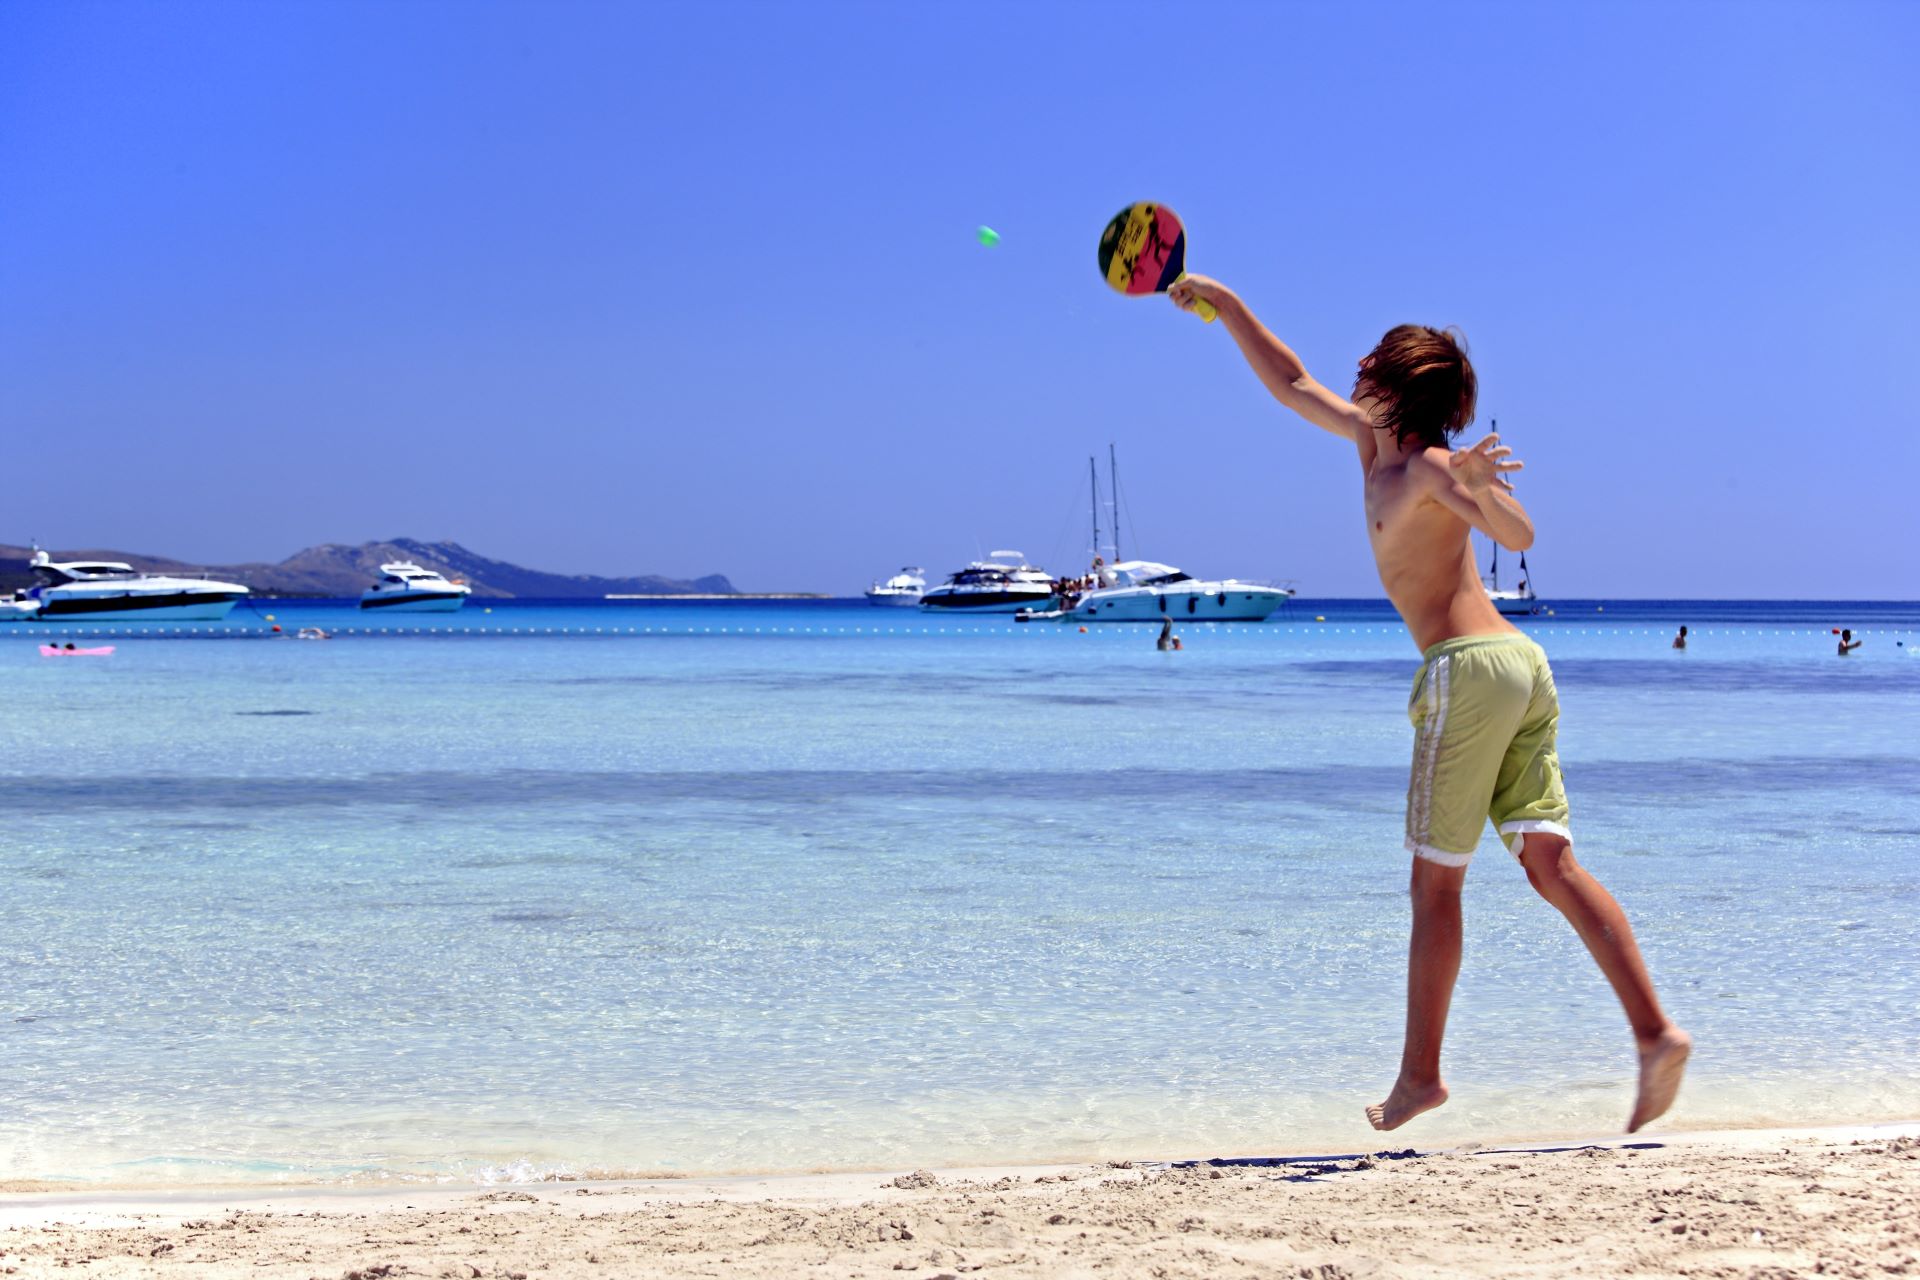 A child playing a game on a sandy beach - Sakarun in Croatia